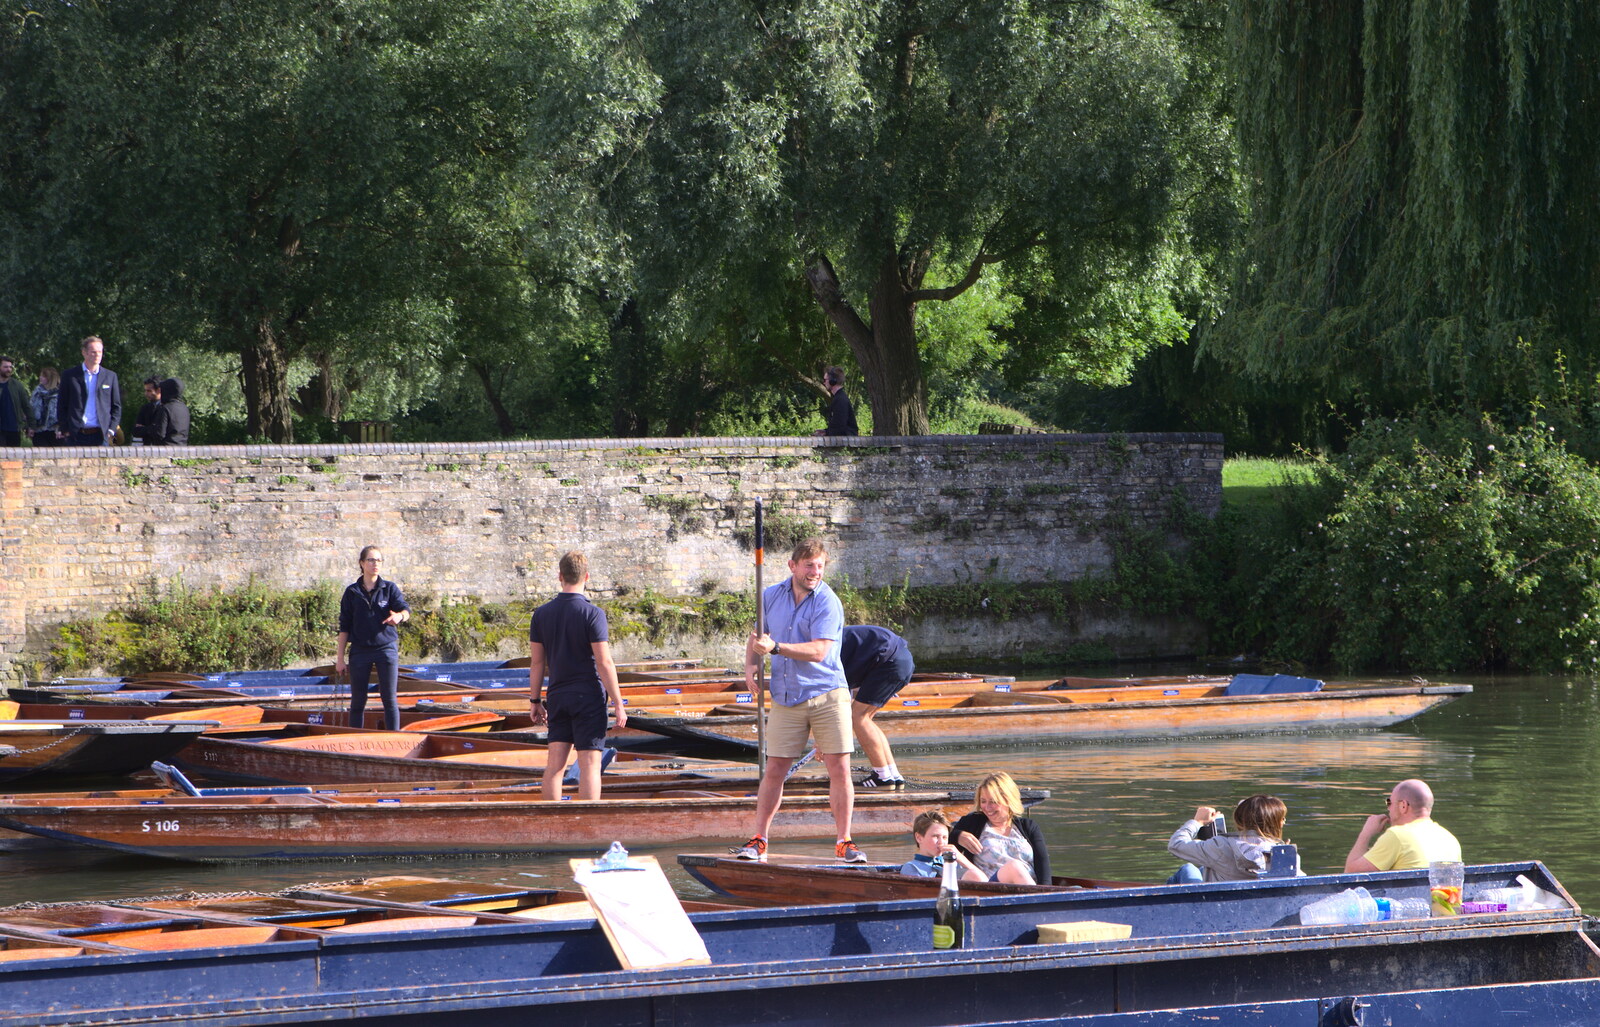 Back in the 'Bridge: an Anniversary, Cambridge - 3rd July 2016: More punting